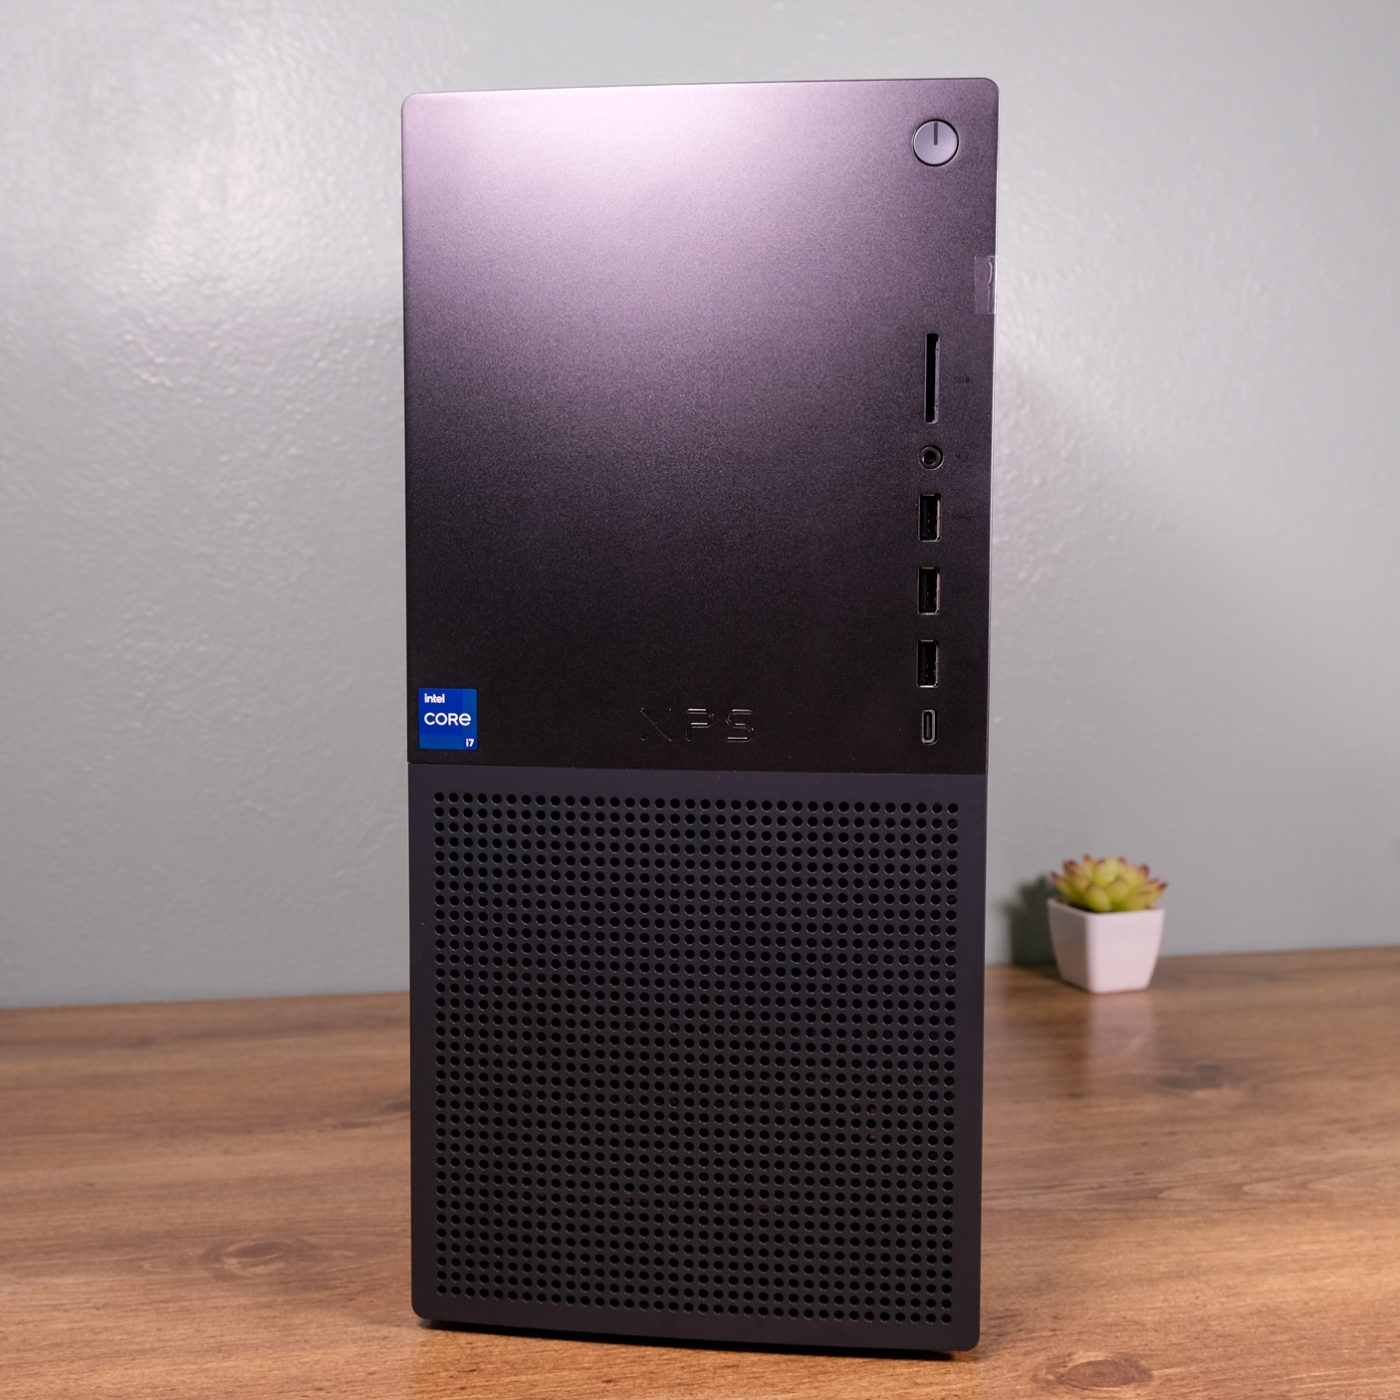 The Best a Dell Optiplex Gaming PC SHOULD Get! 